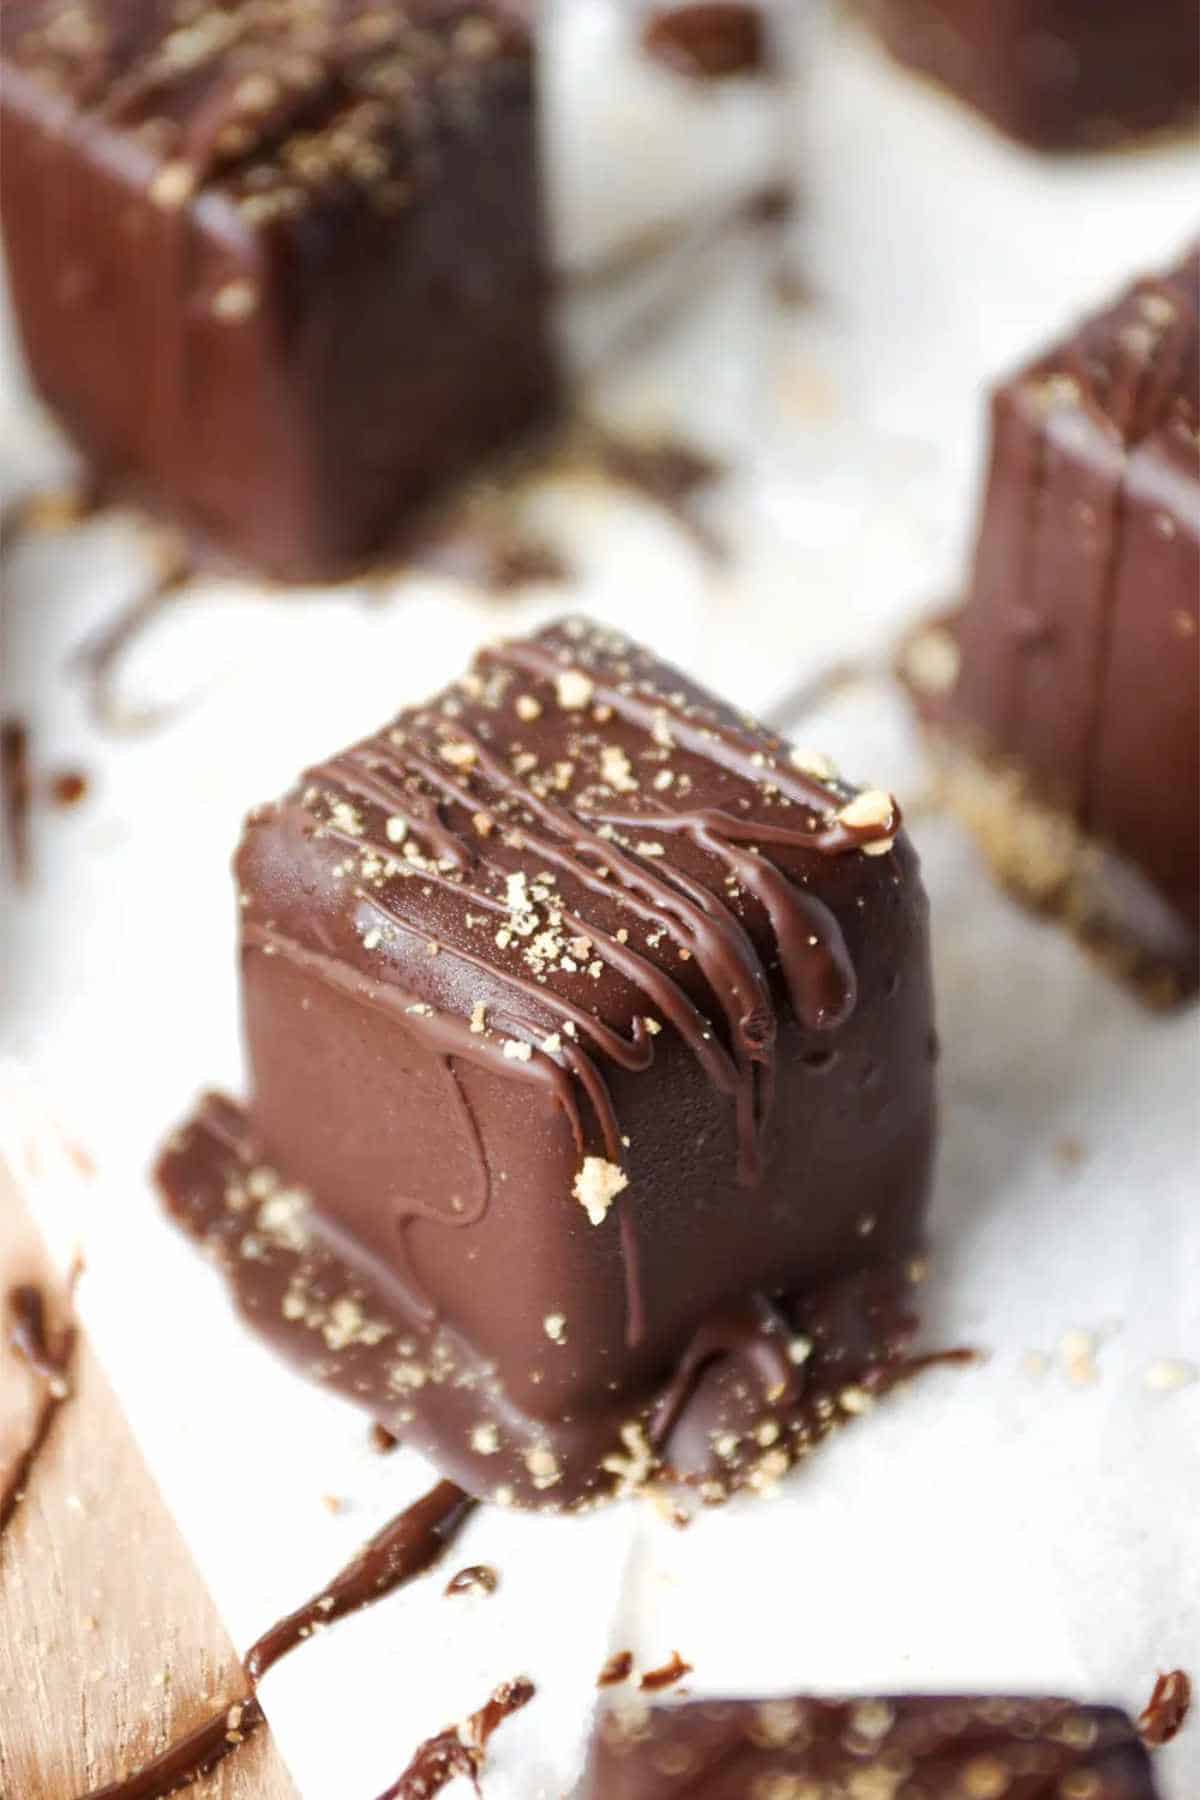 father's day dessert ideas chocolate covered cheesecake bites.